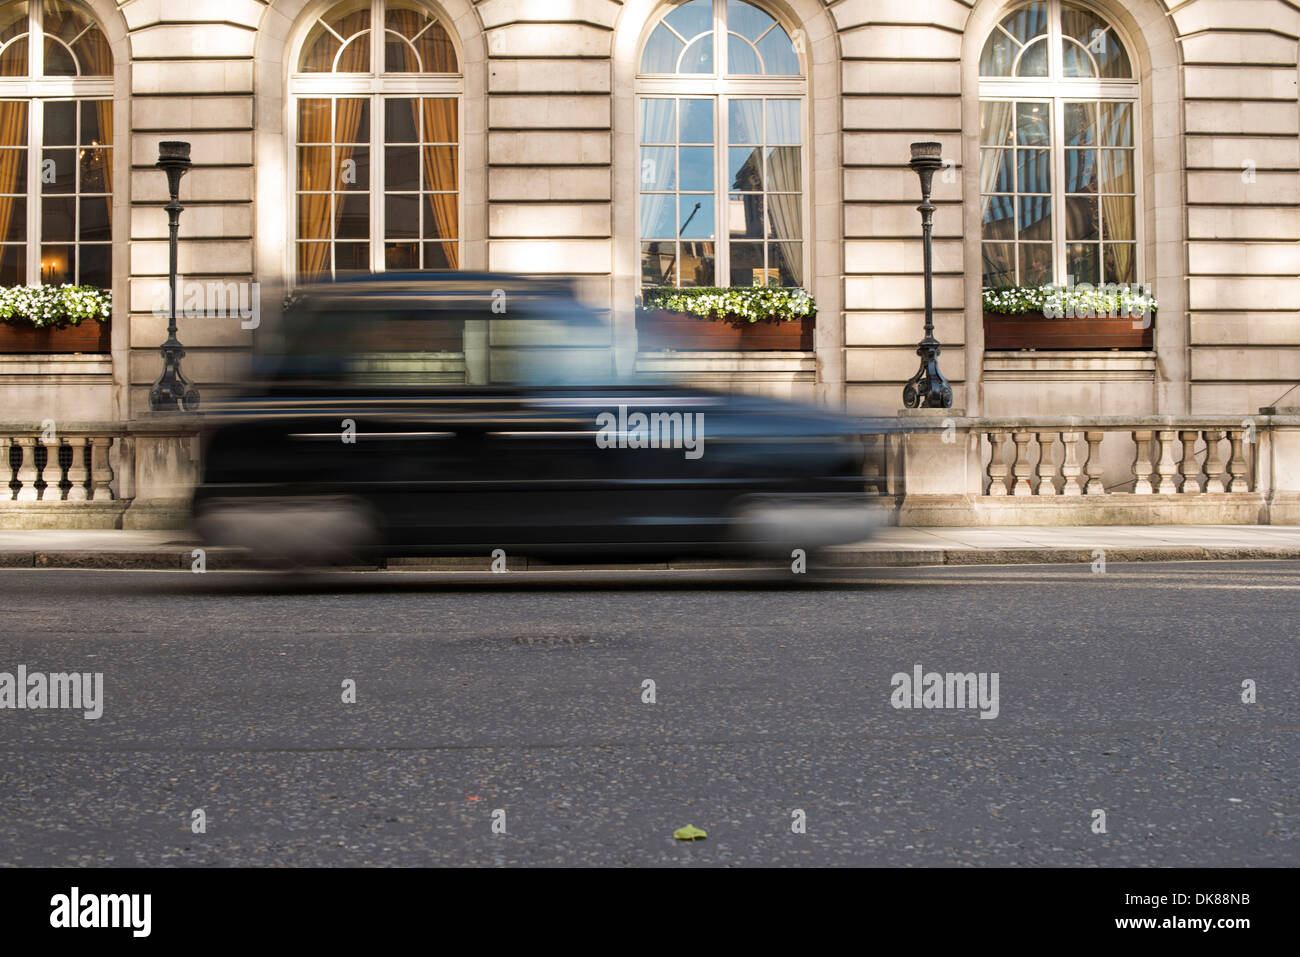 Vintage Taxi in motion in London. Stock Photo